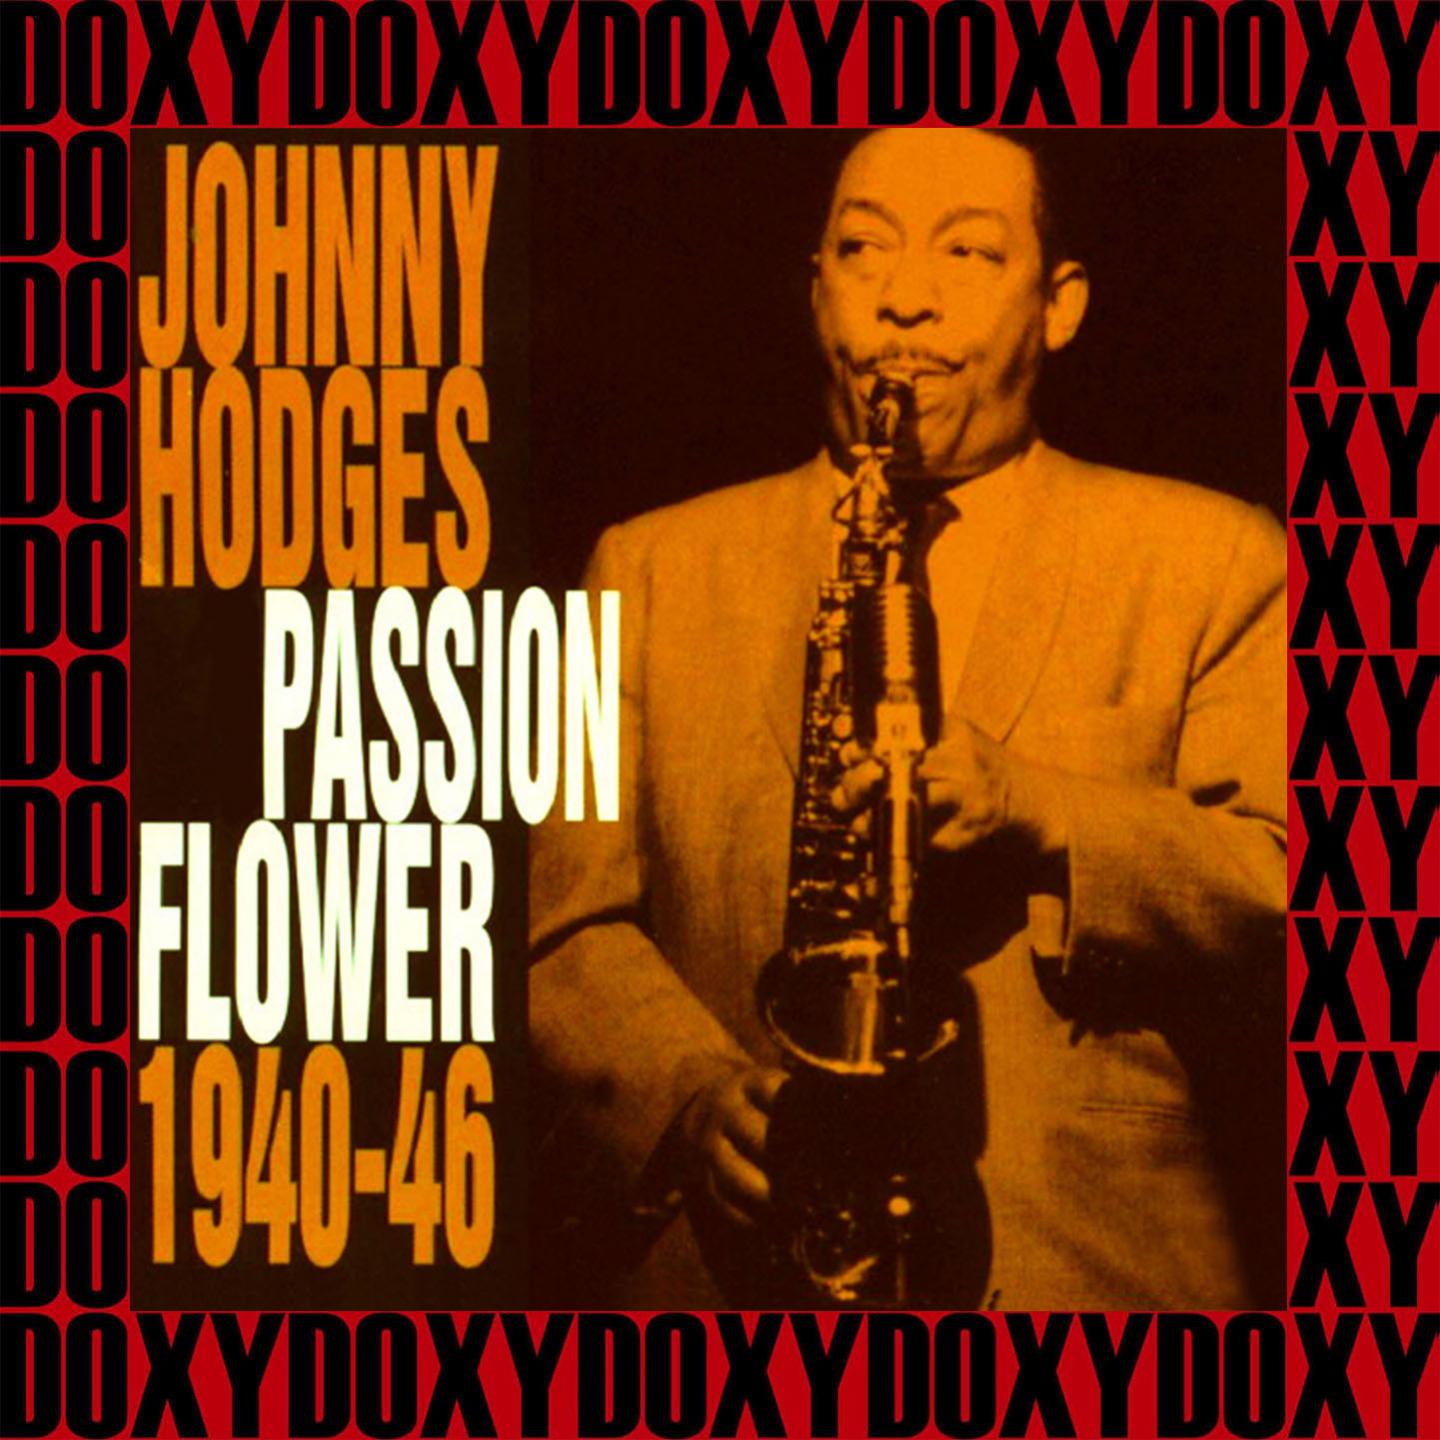 Passion Flower 1940-1946 (Remastered Version) (Doxy Collection)